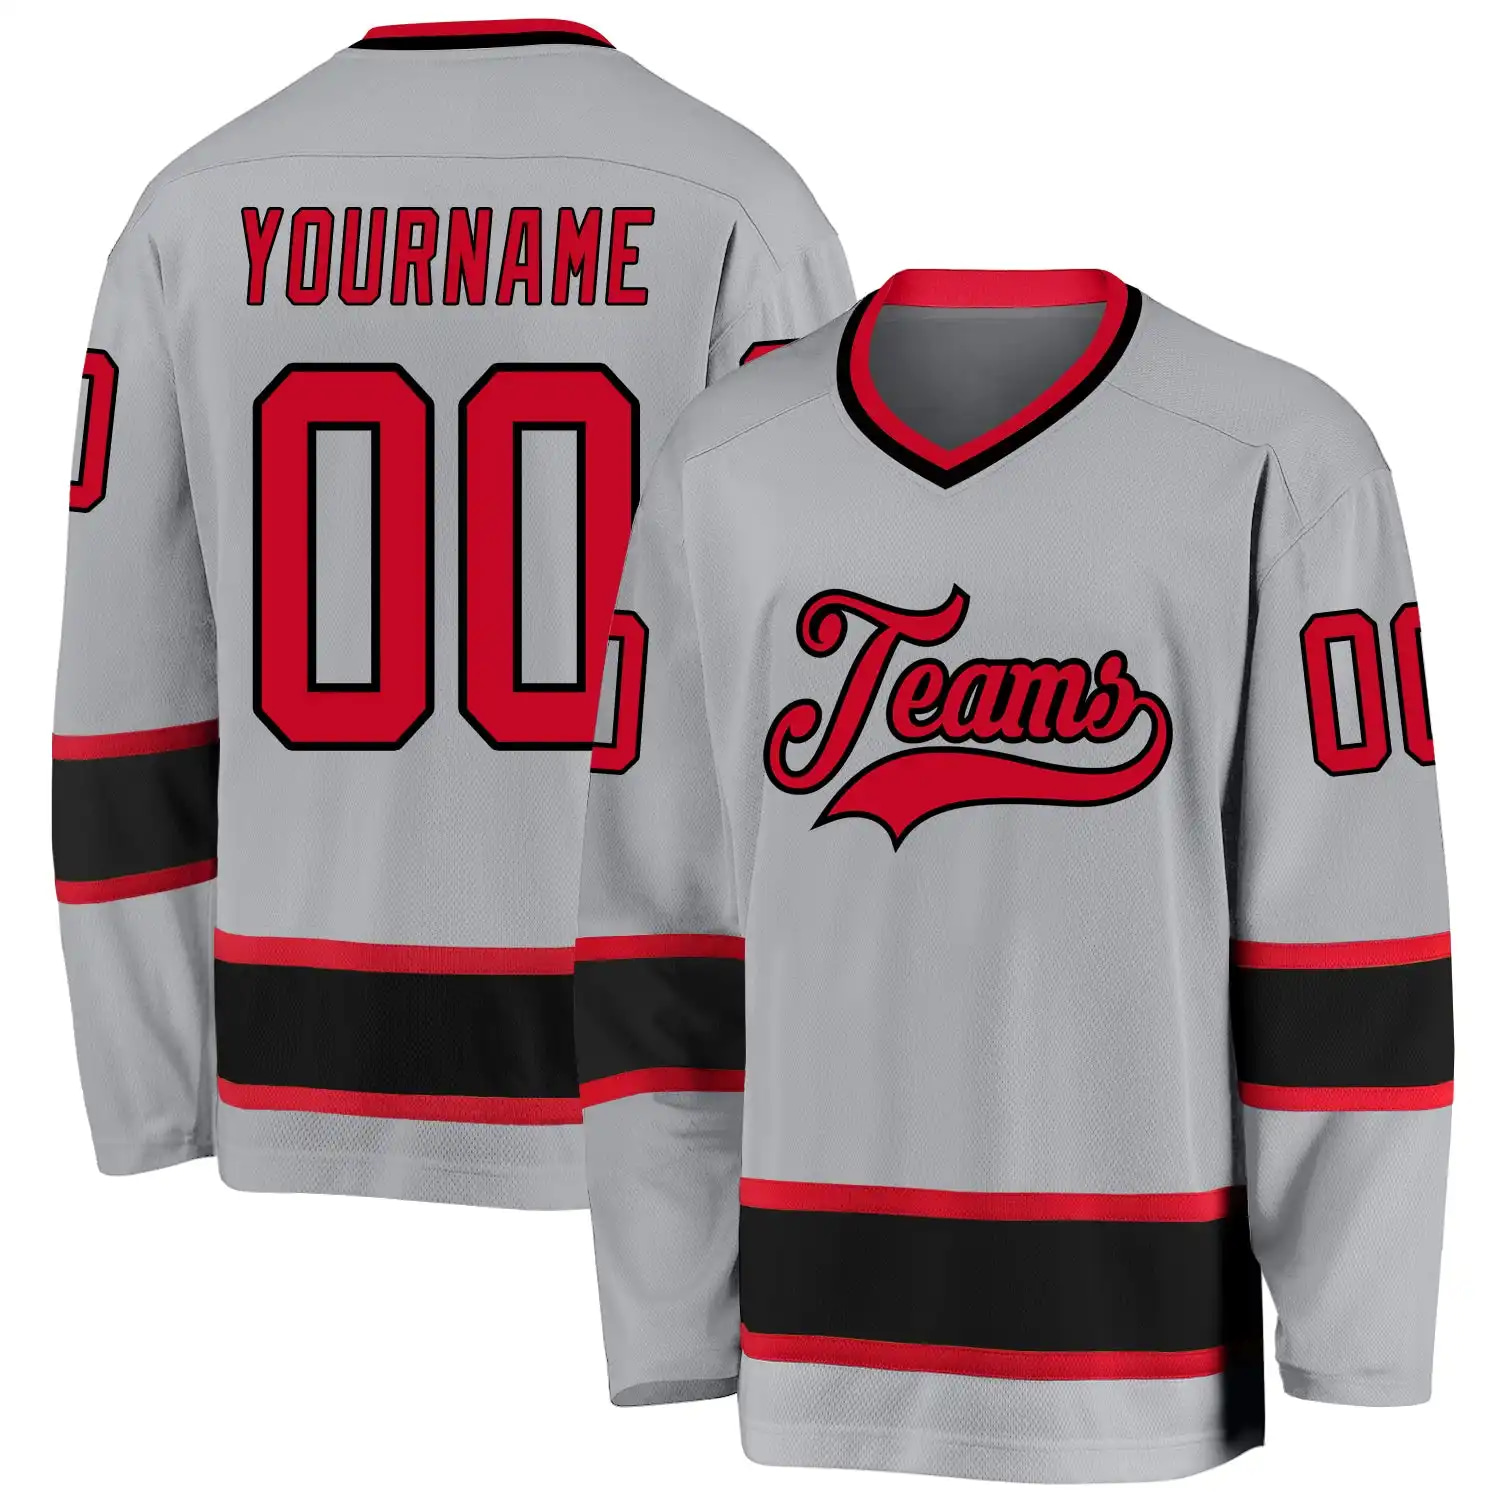 Stitched And Print Gray Red-black Hockey Jersey Custom